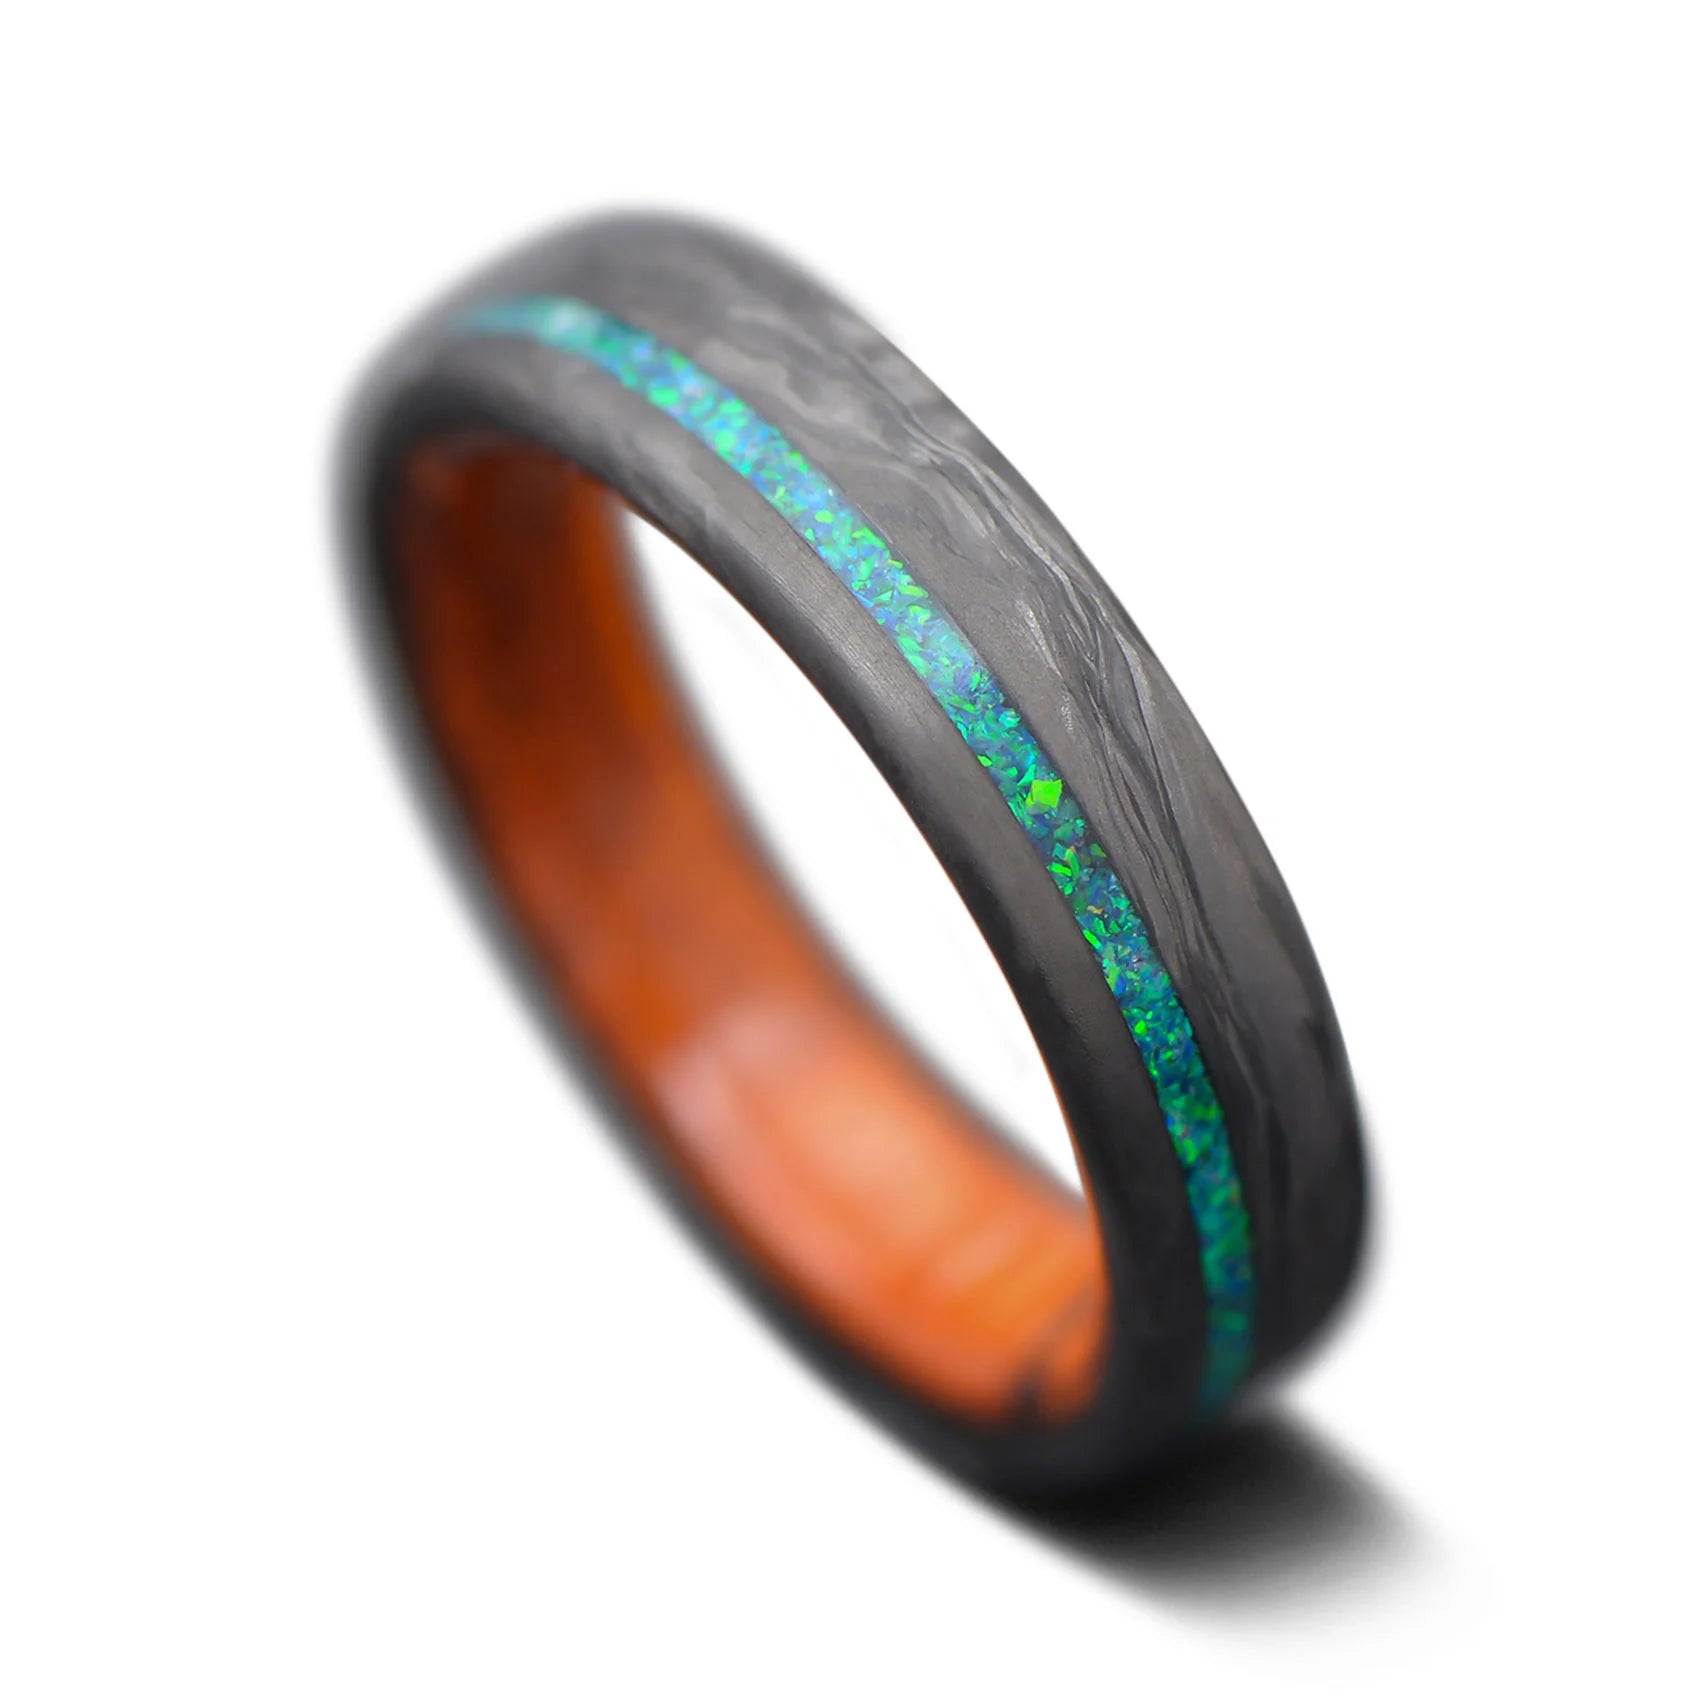 Forged Carbon fiber  ring with emerald opal inlay and Desert Ironwood inner sleeve, 5mm -THE HORIZON